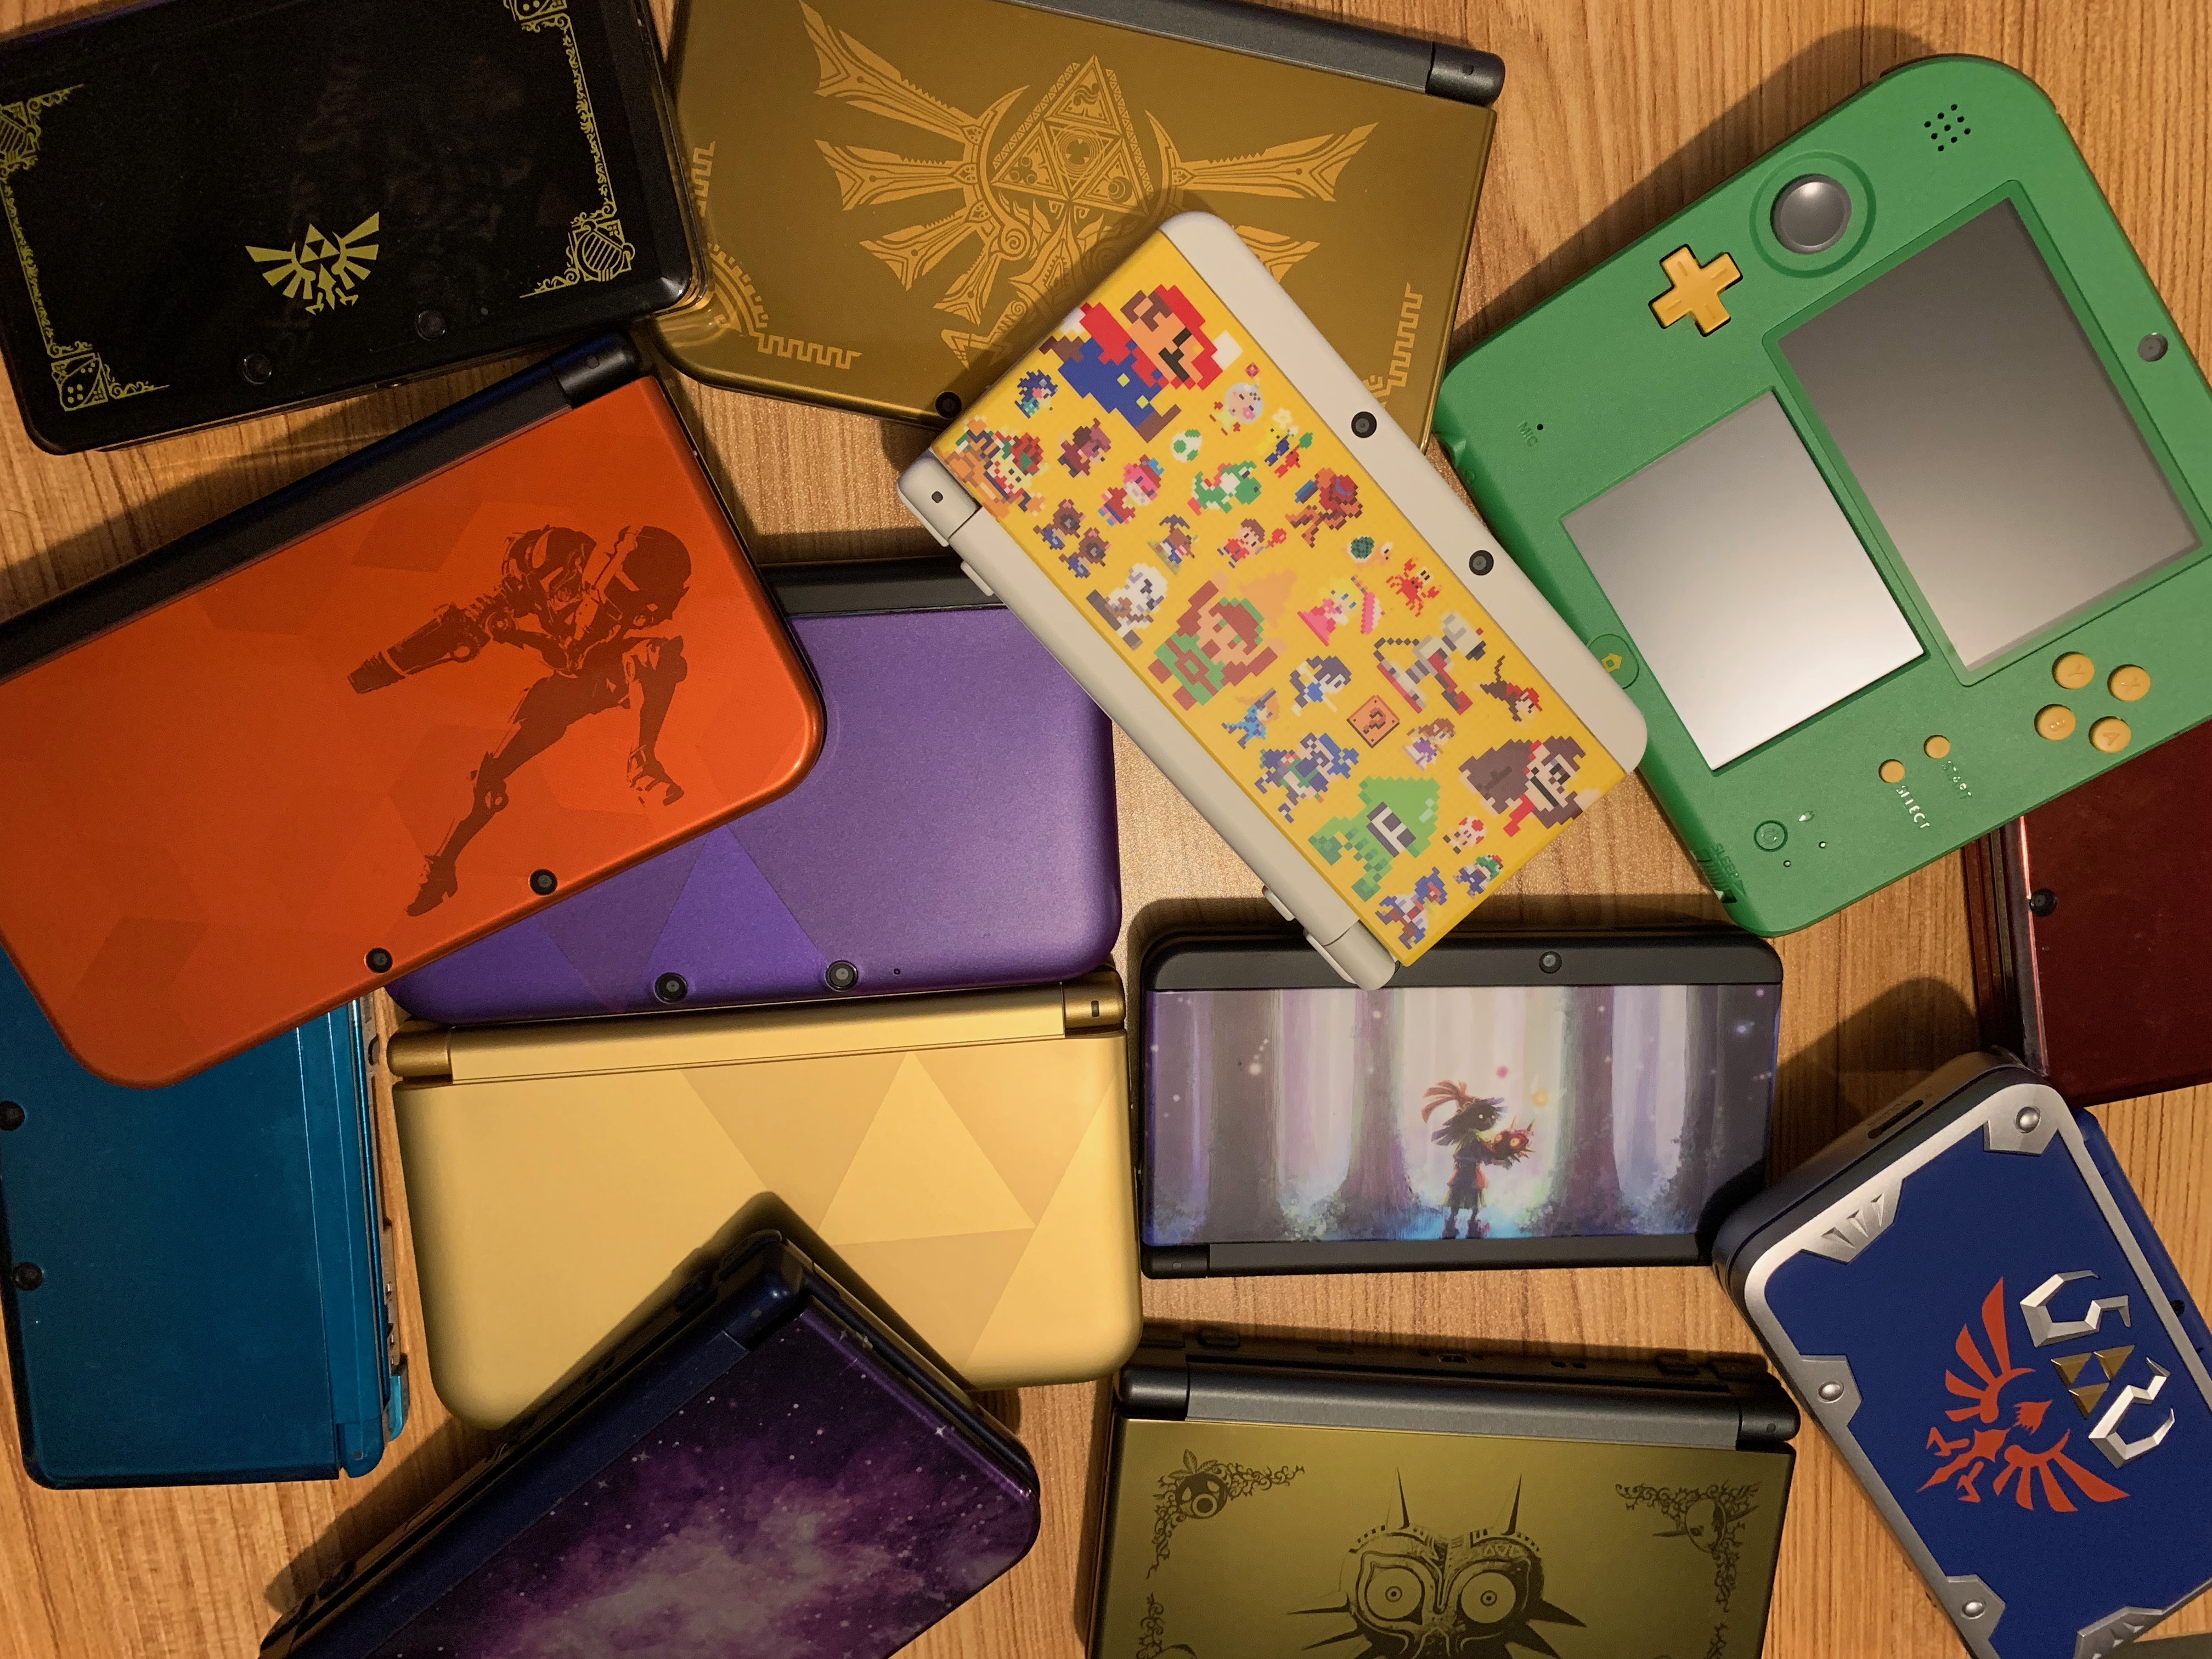 The Many Screens Of The 3DS